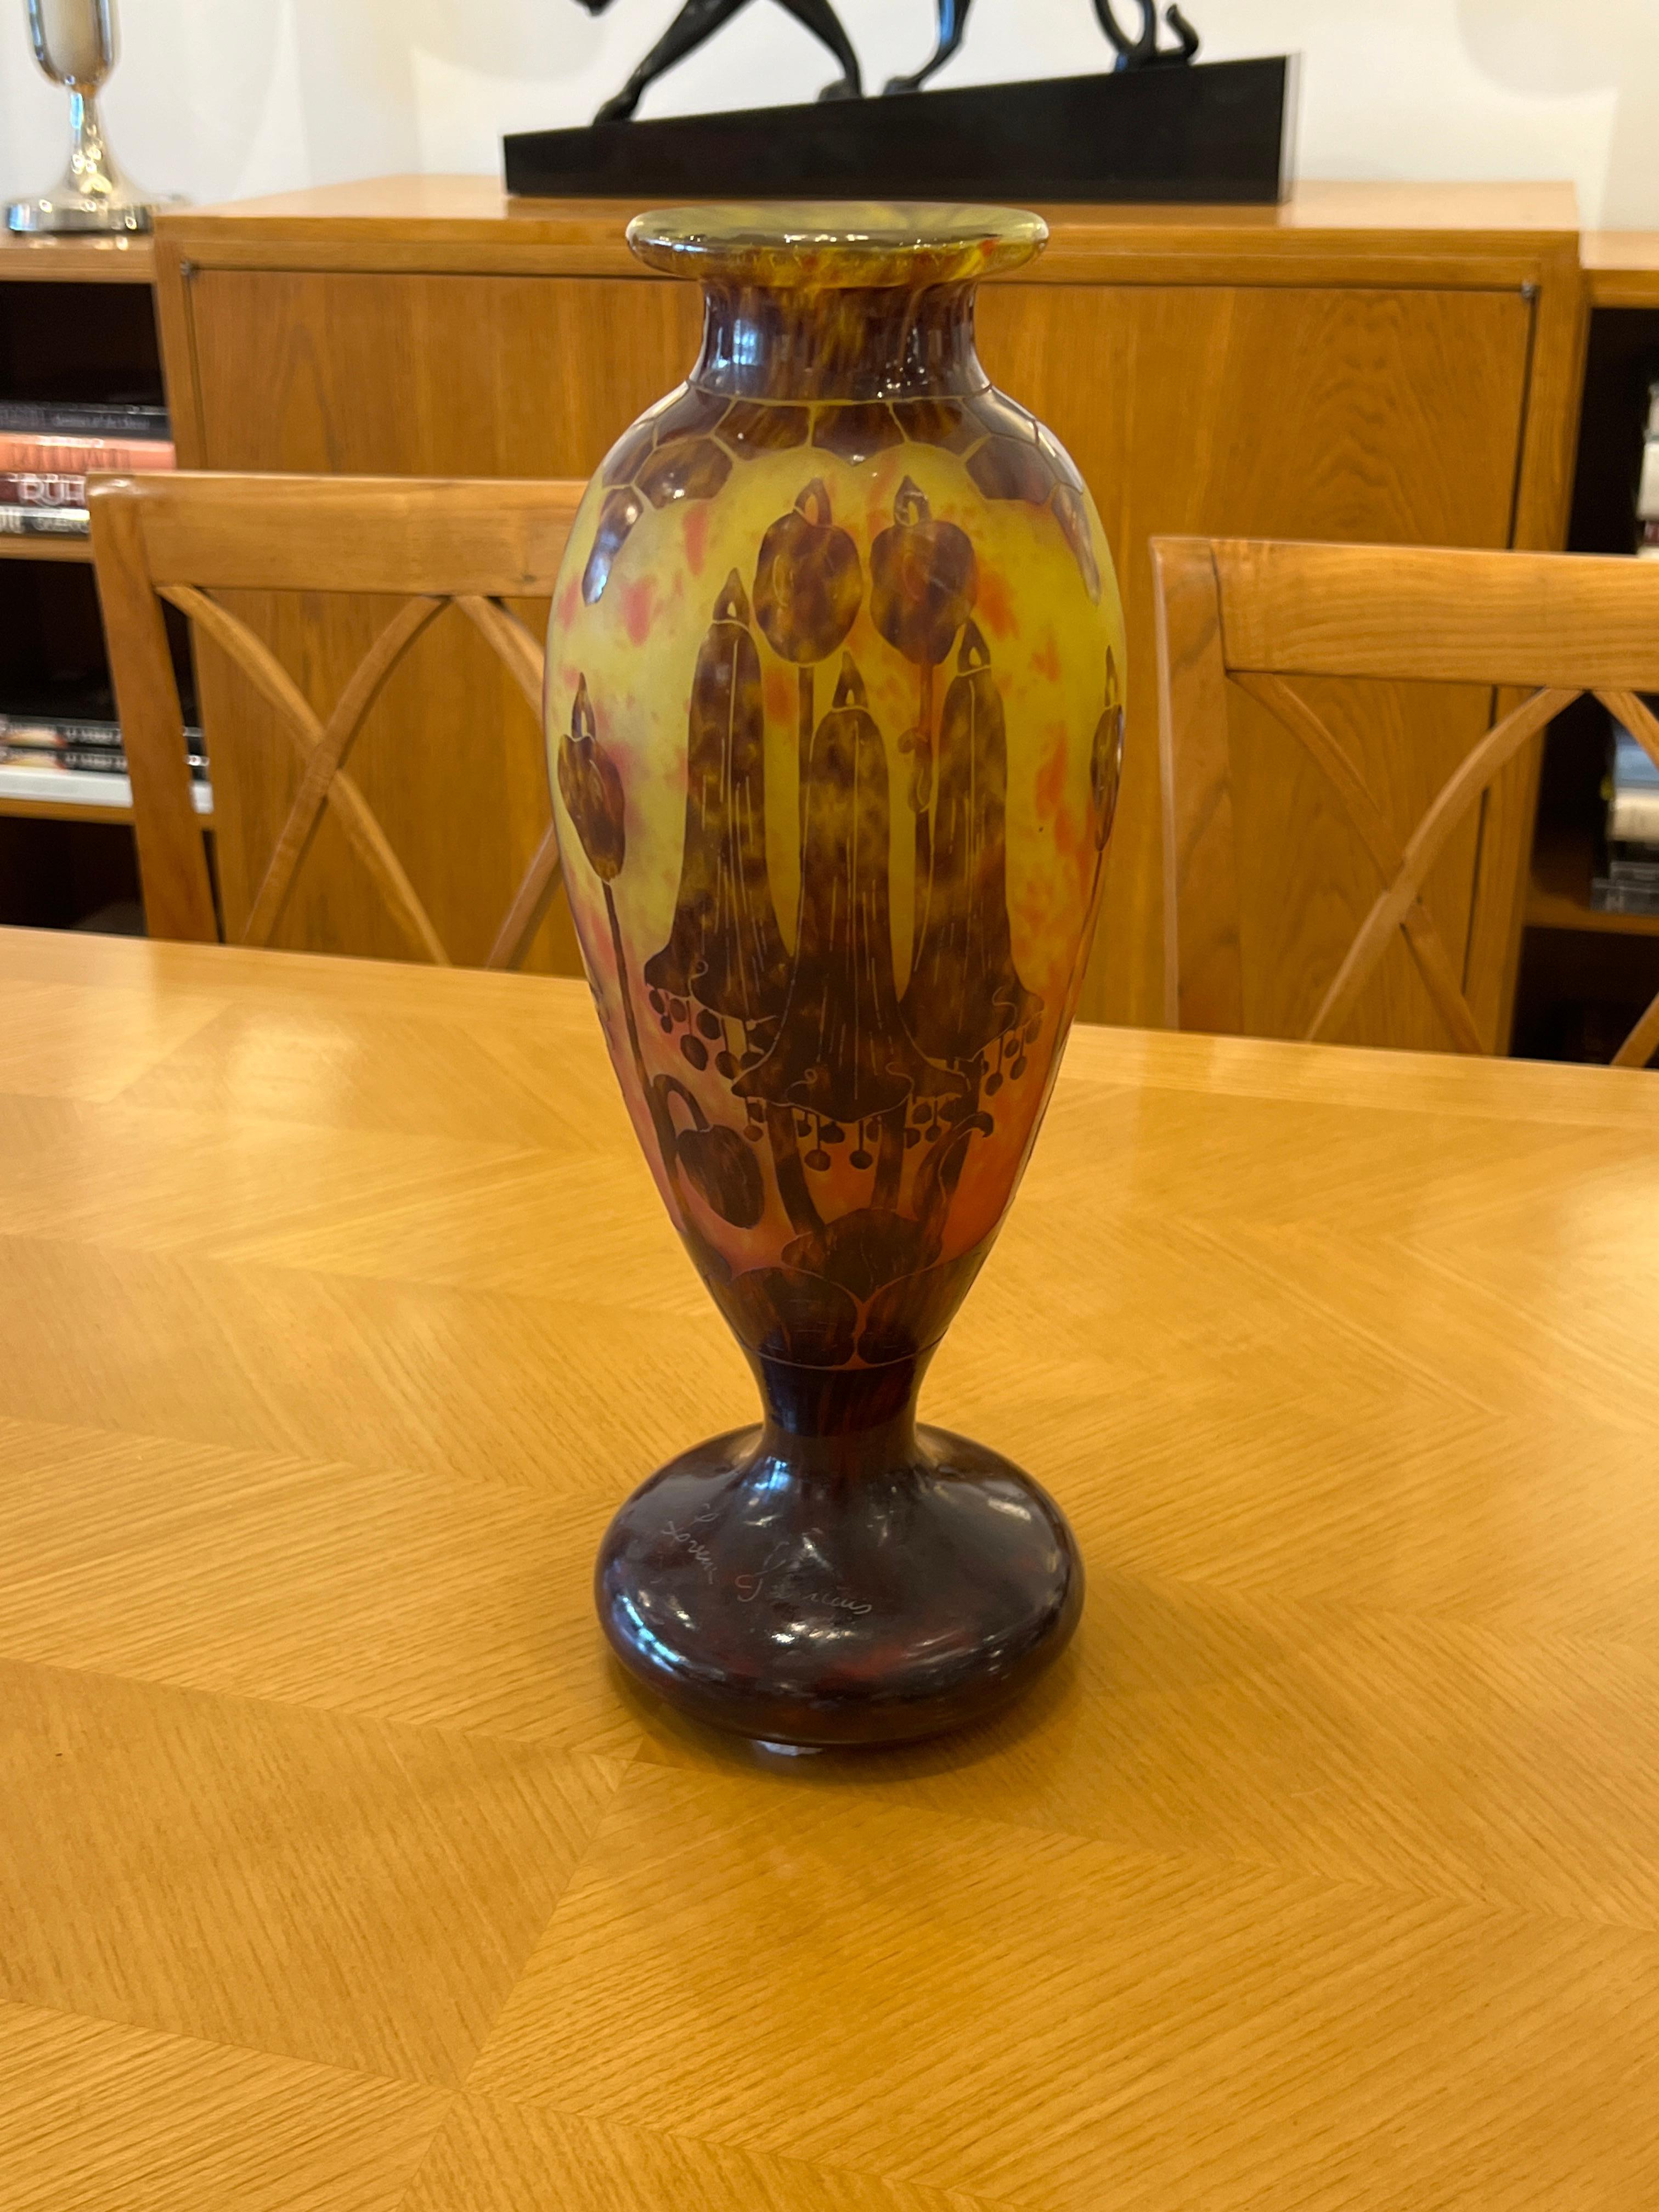 A glass vase in Mottled Yellow, Orange and Copper Red glass, overlaid with Violet.  It has a Violet and Yellow stem and foot. The pattern is acid-etched.  The floral design is from the Campanules serie by Le Verre Français.
Signature: Le Verre